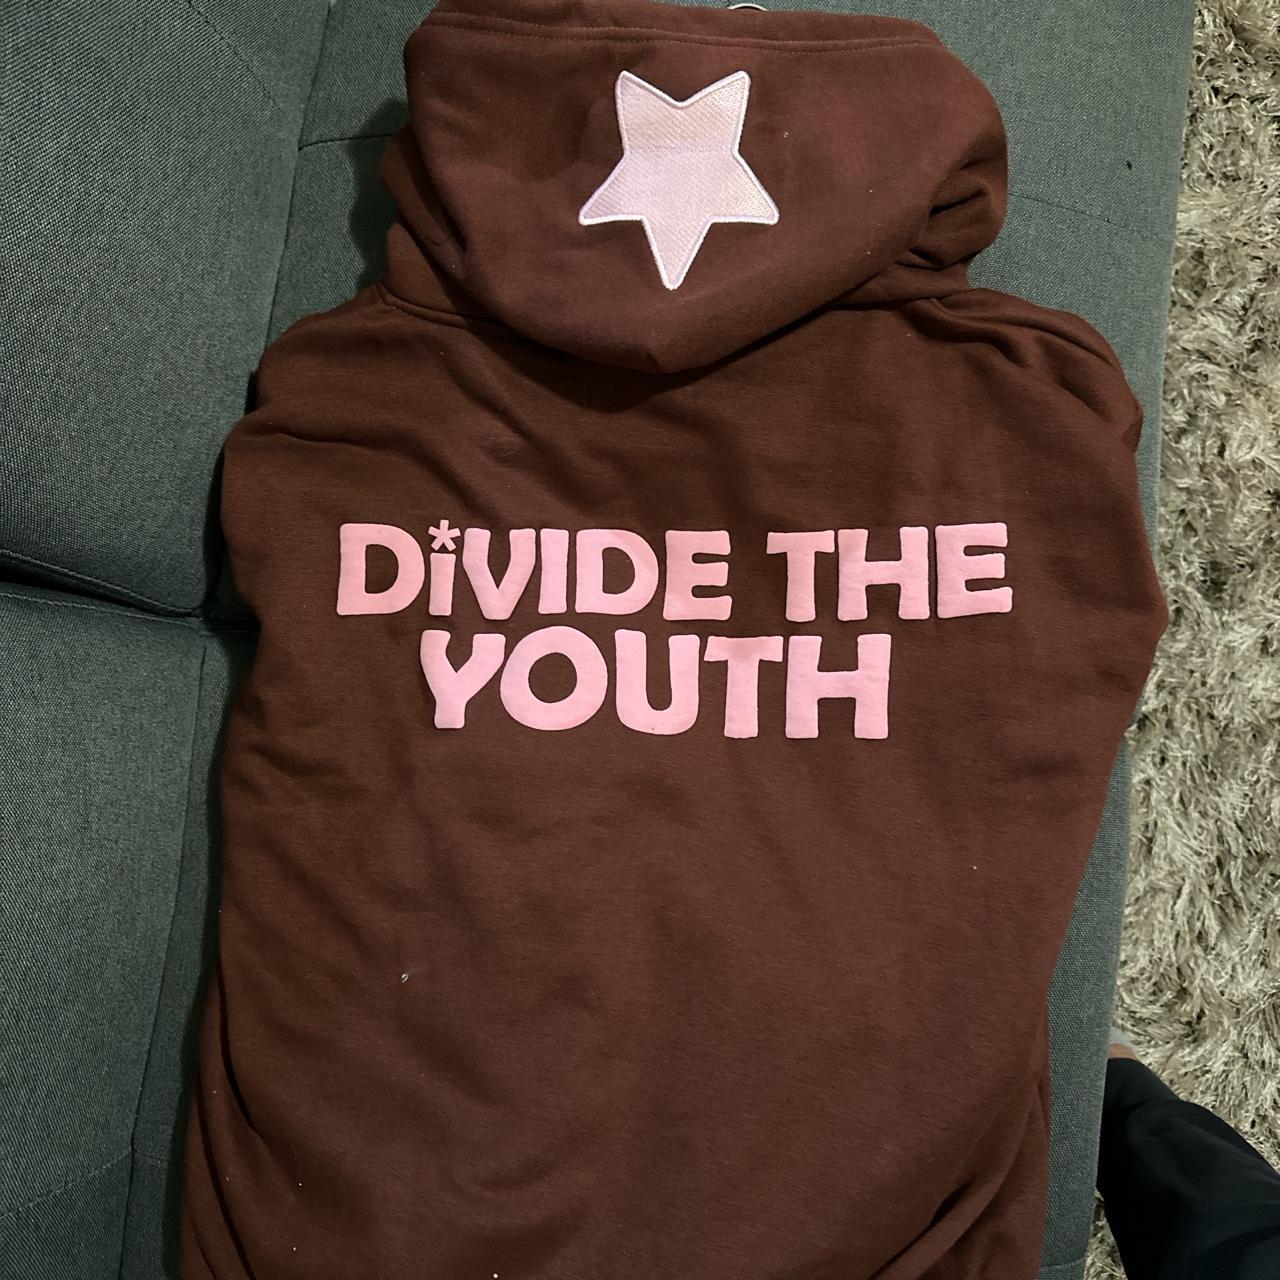 Product Image 2 - Divide the youth hoodie
Dty

Item is